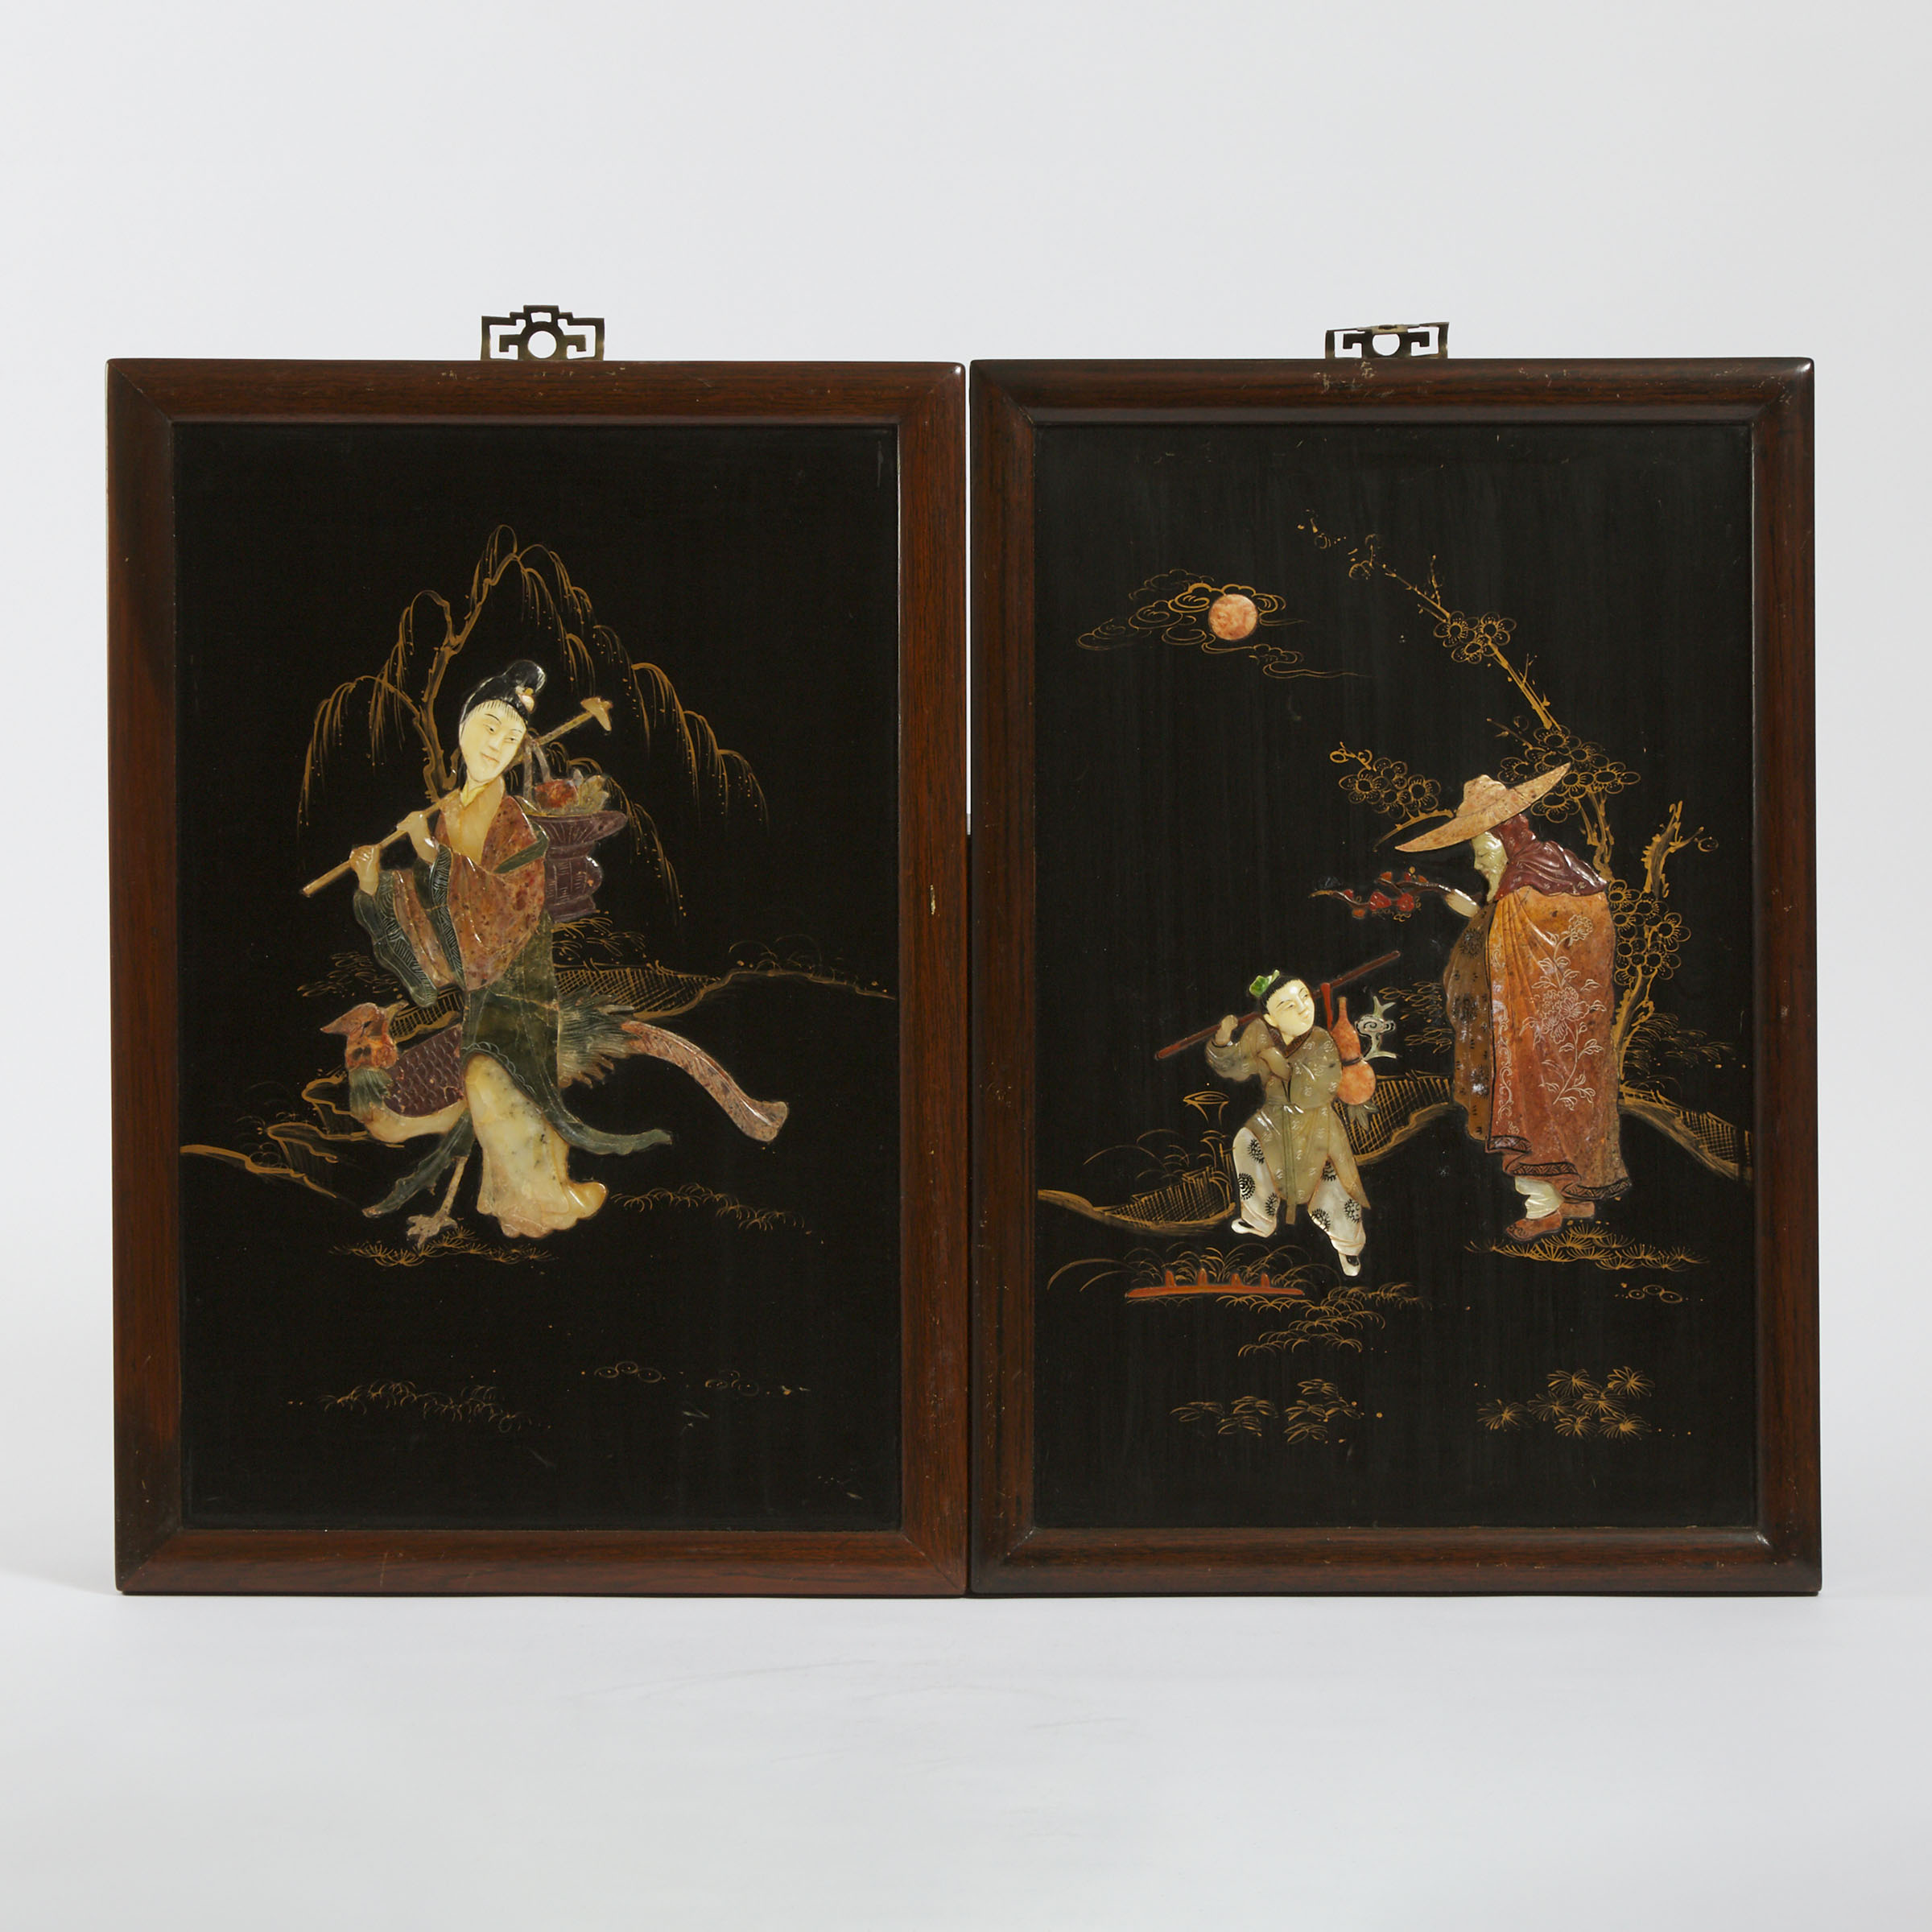 A Pair of Soapstone Inlaid 'Figural' Panels, Republican Period